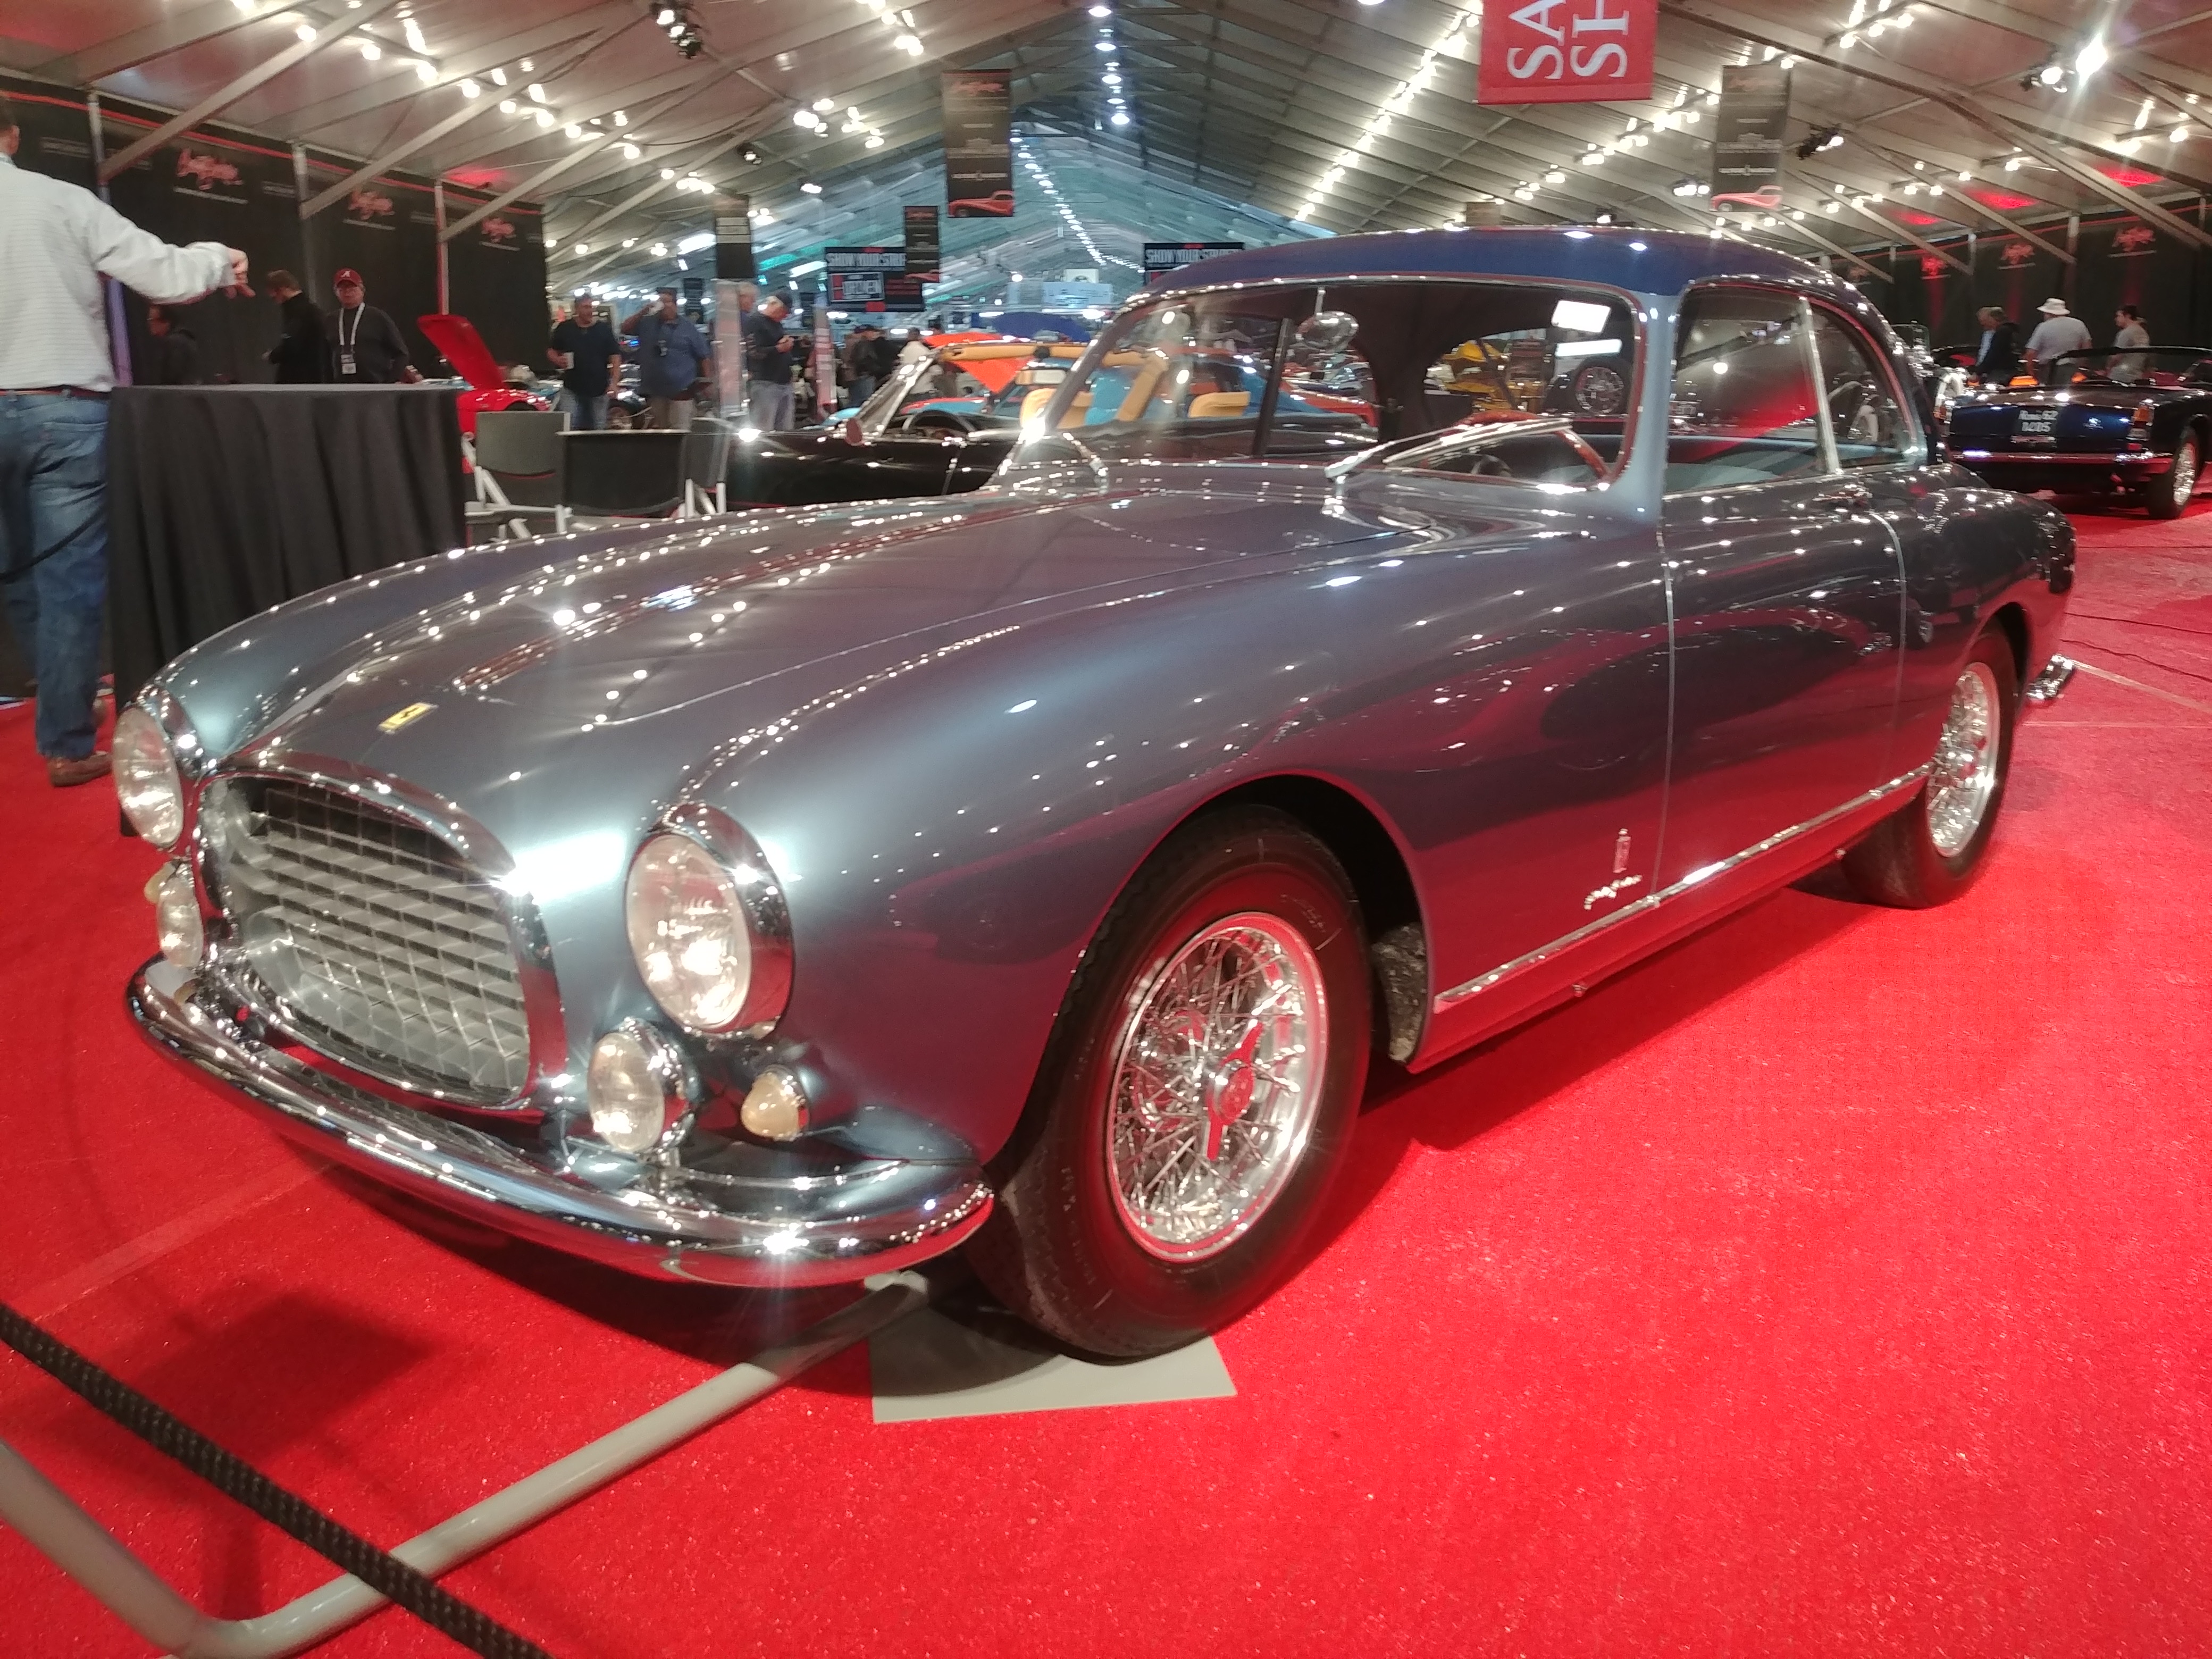 , Andy selects his favorites at Barrett-Jackson’s Scottsdale sale, ClassicCars.com Journal